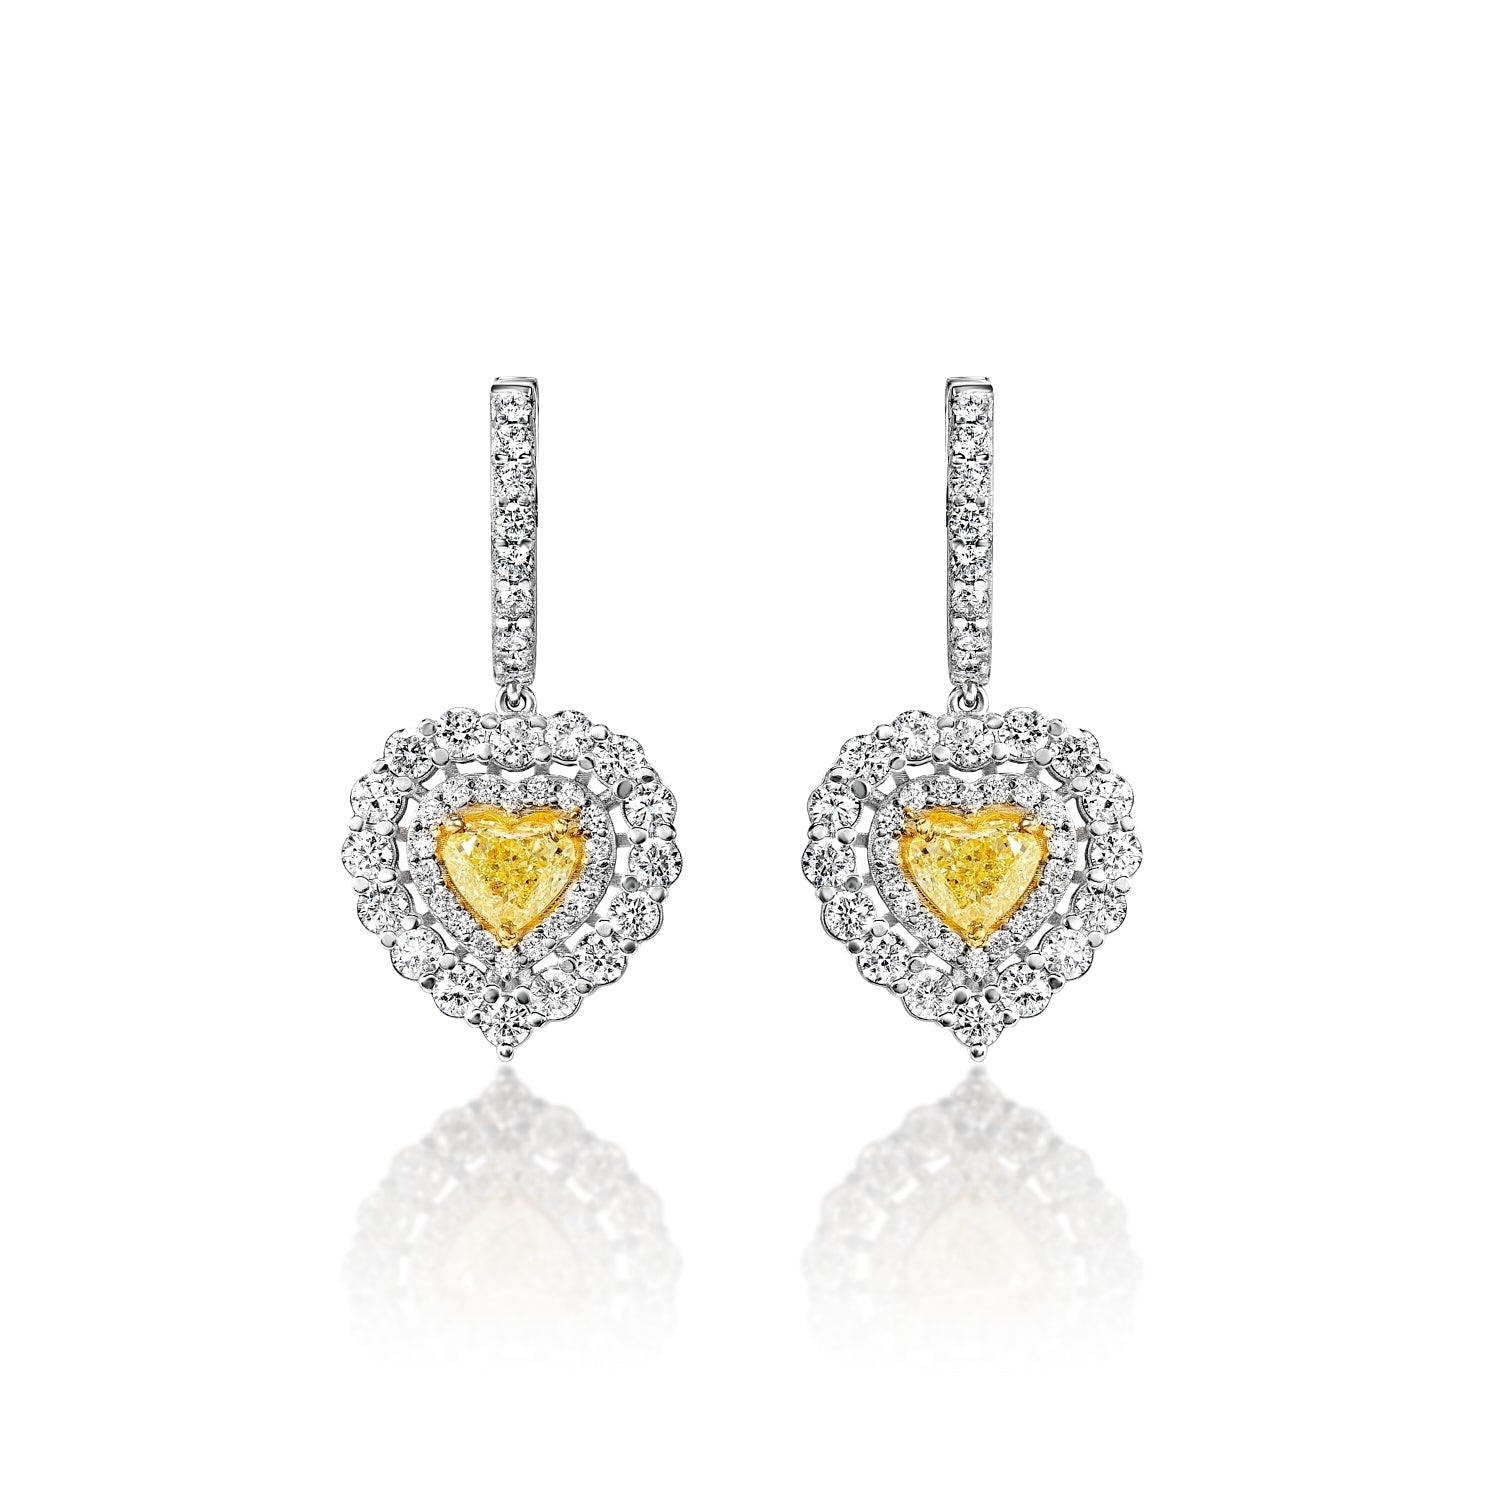 Add a little love to your style with our heart-shaped diamond earrings 💖✨  The perfect gift for yourself or a loved one, these earrin... | Instagram